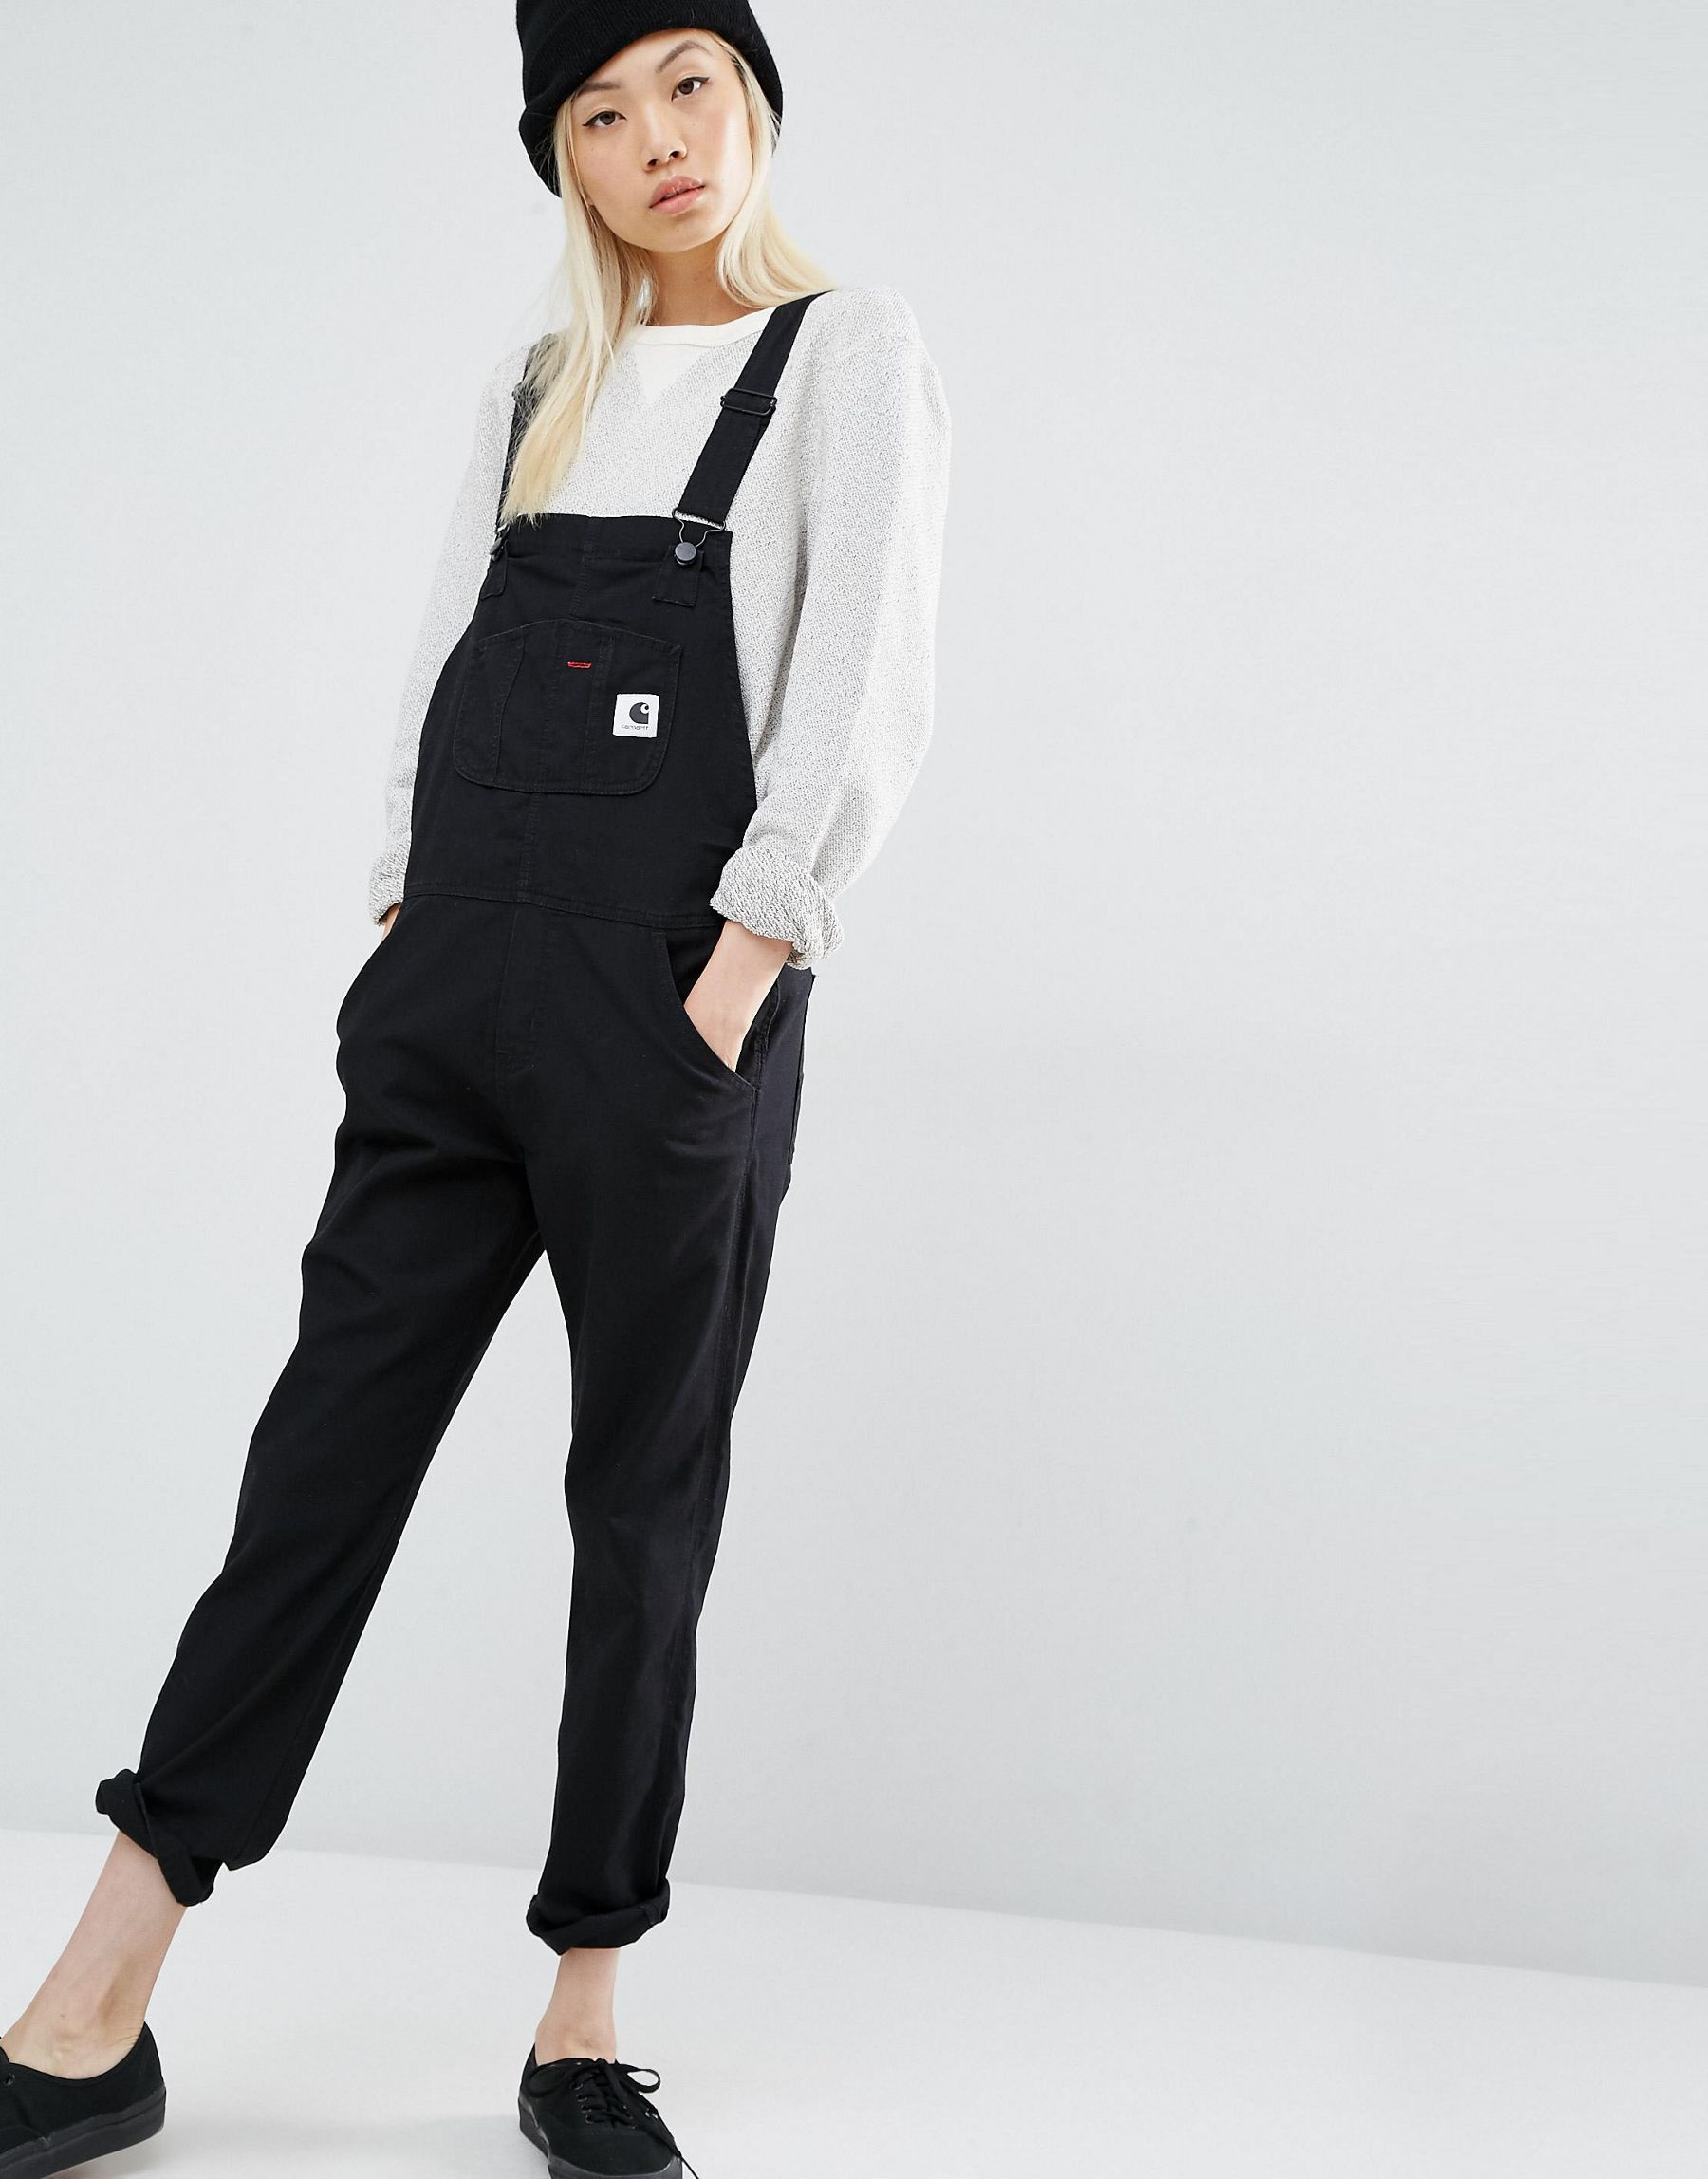 Carhartt WIP Denim Bib Overall Dungarees With Front Logo in Black - Lyst